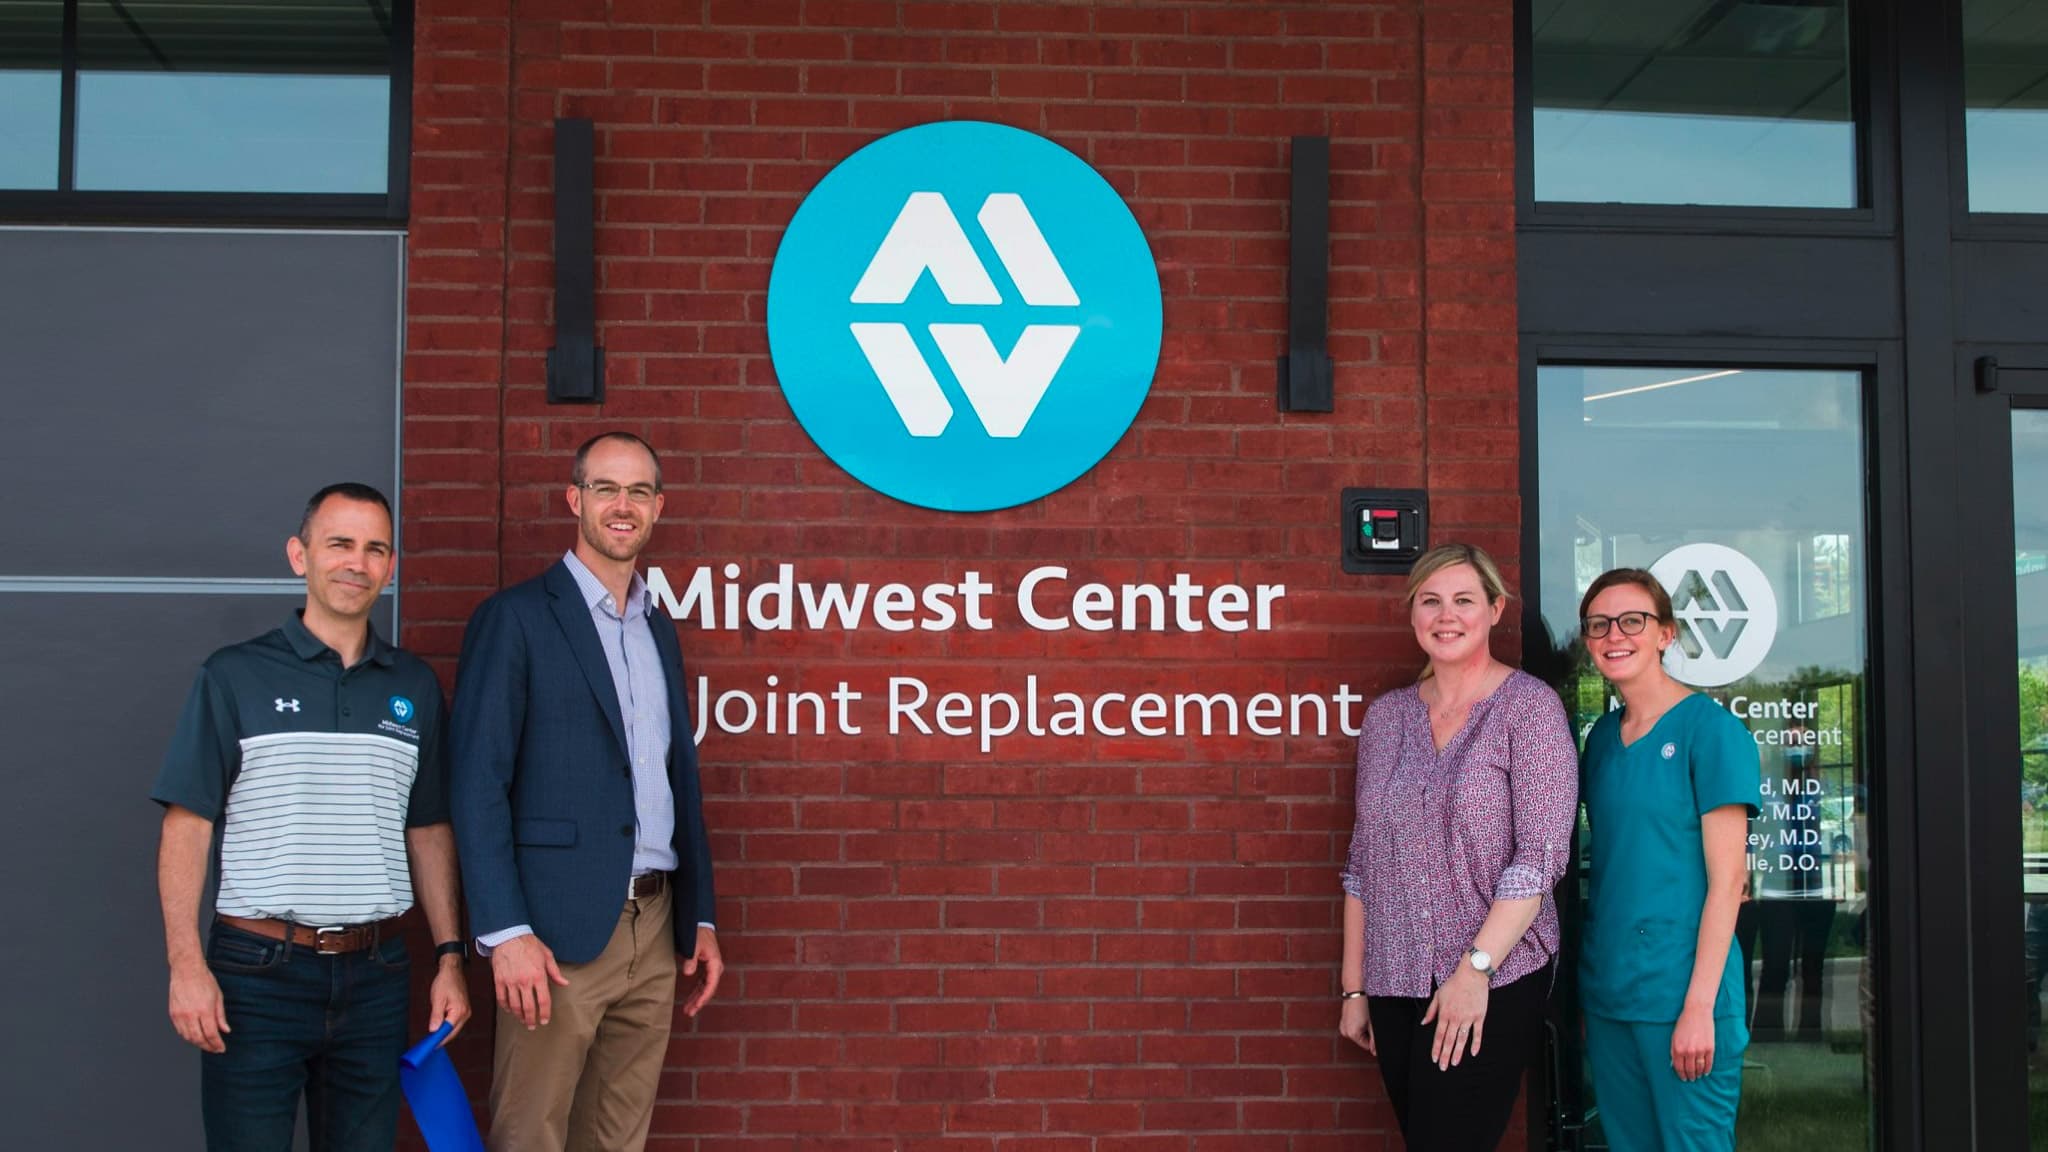 Staff from the Midwest Center for Joint Replacement stand in front of a company sign on the front of a MCJR location